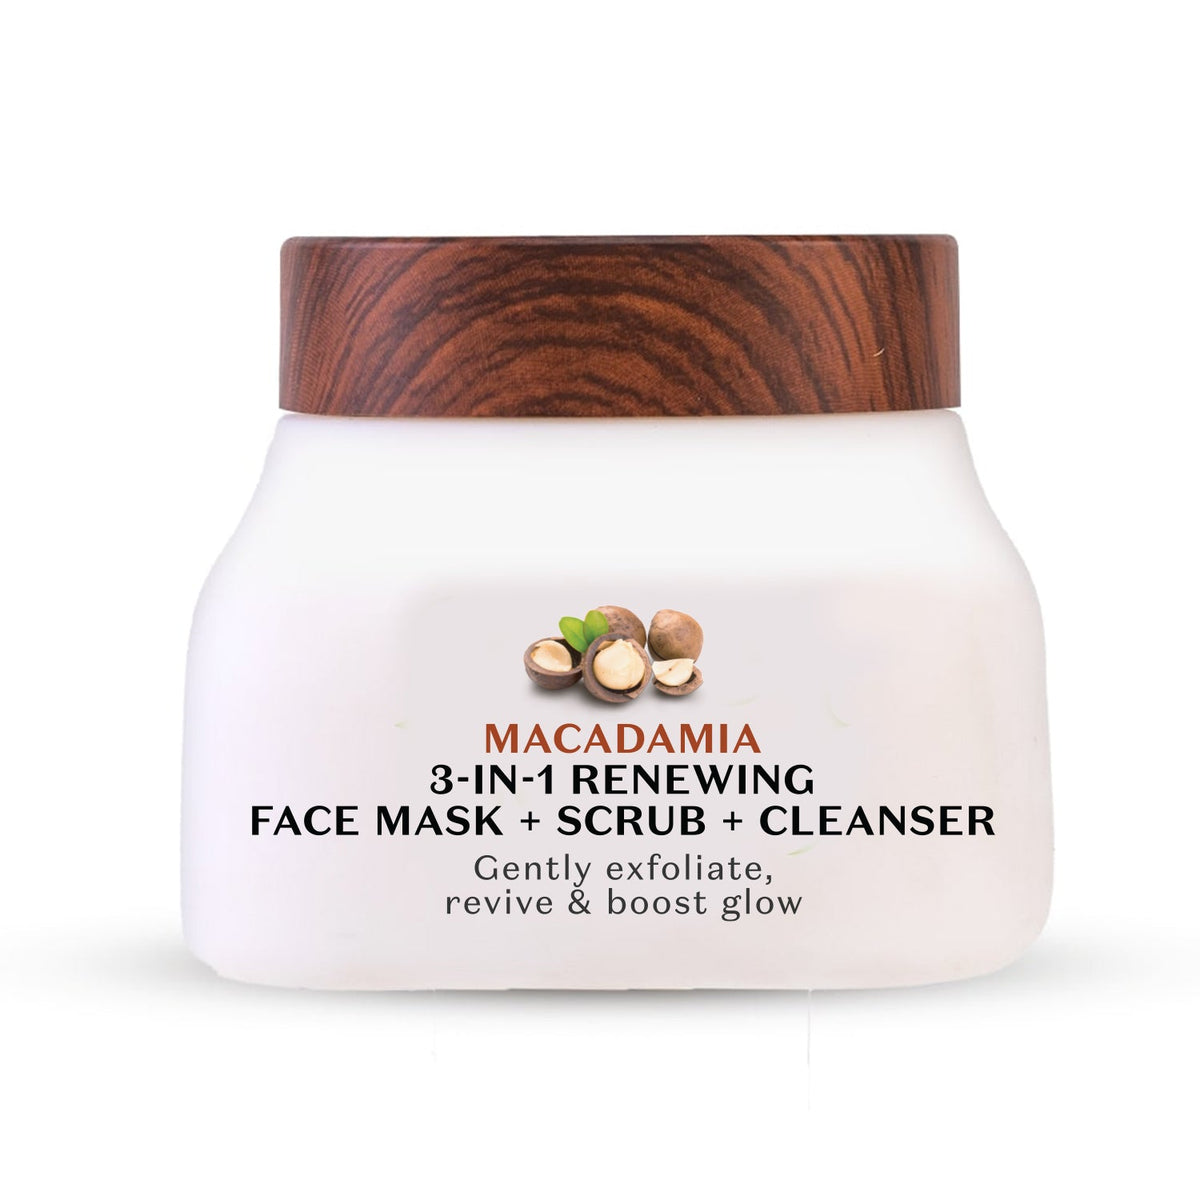 [CRED] Macadamia 3 in 1 Renewing Face Mask, Scrub & Cleanser | From the makers of Parachute Advansed | 140ml